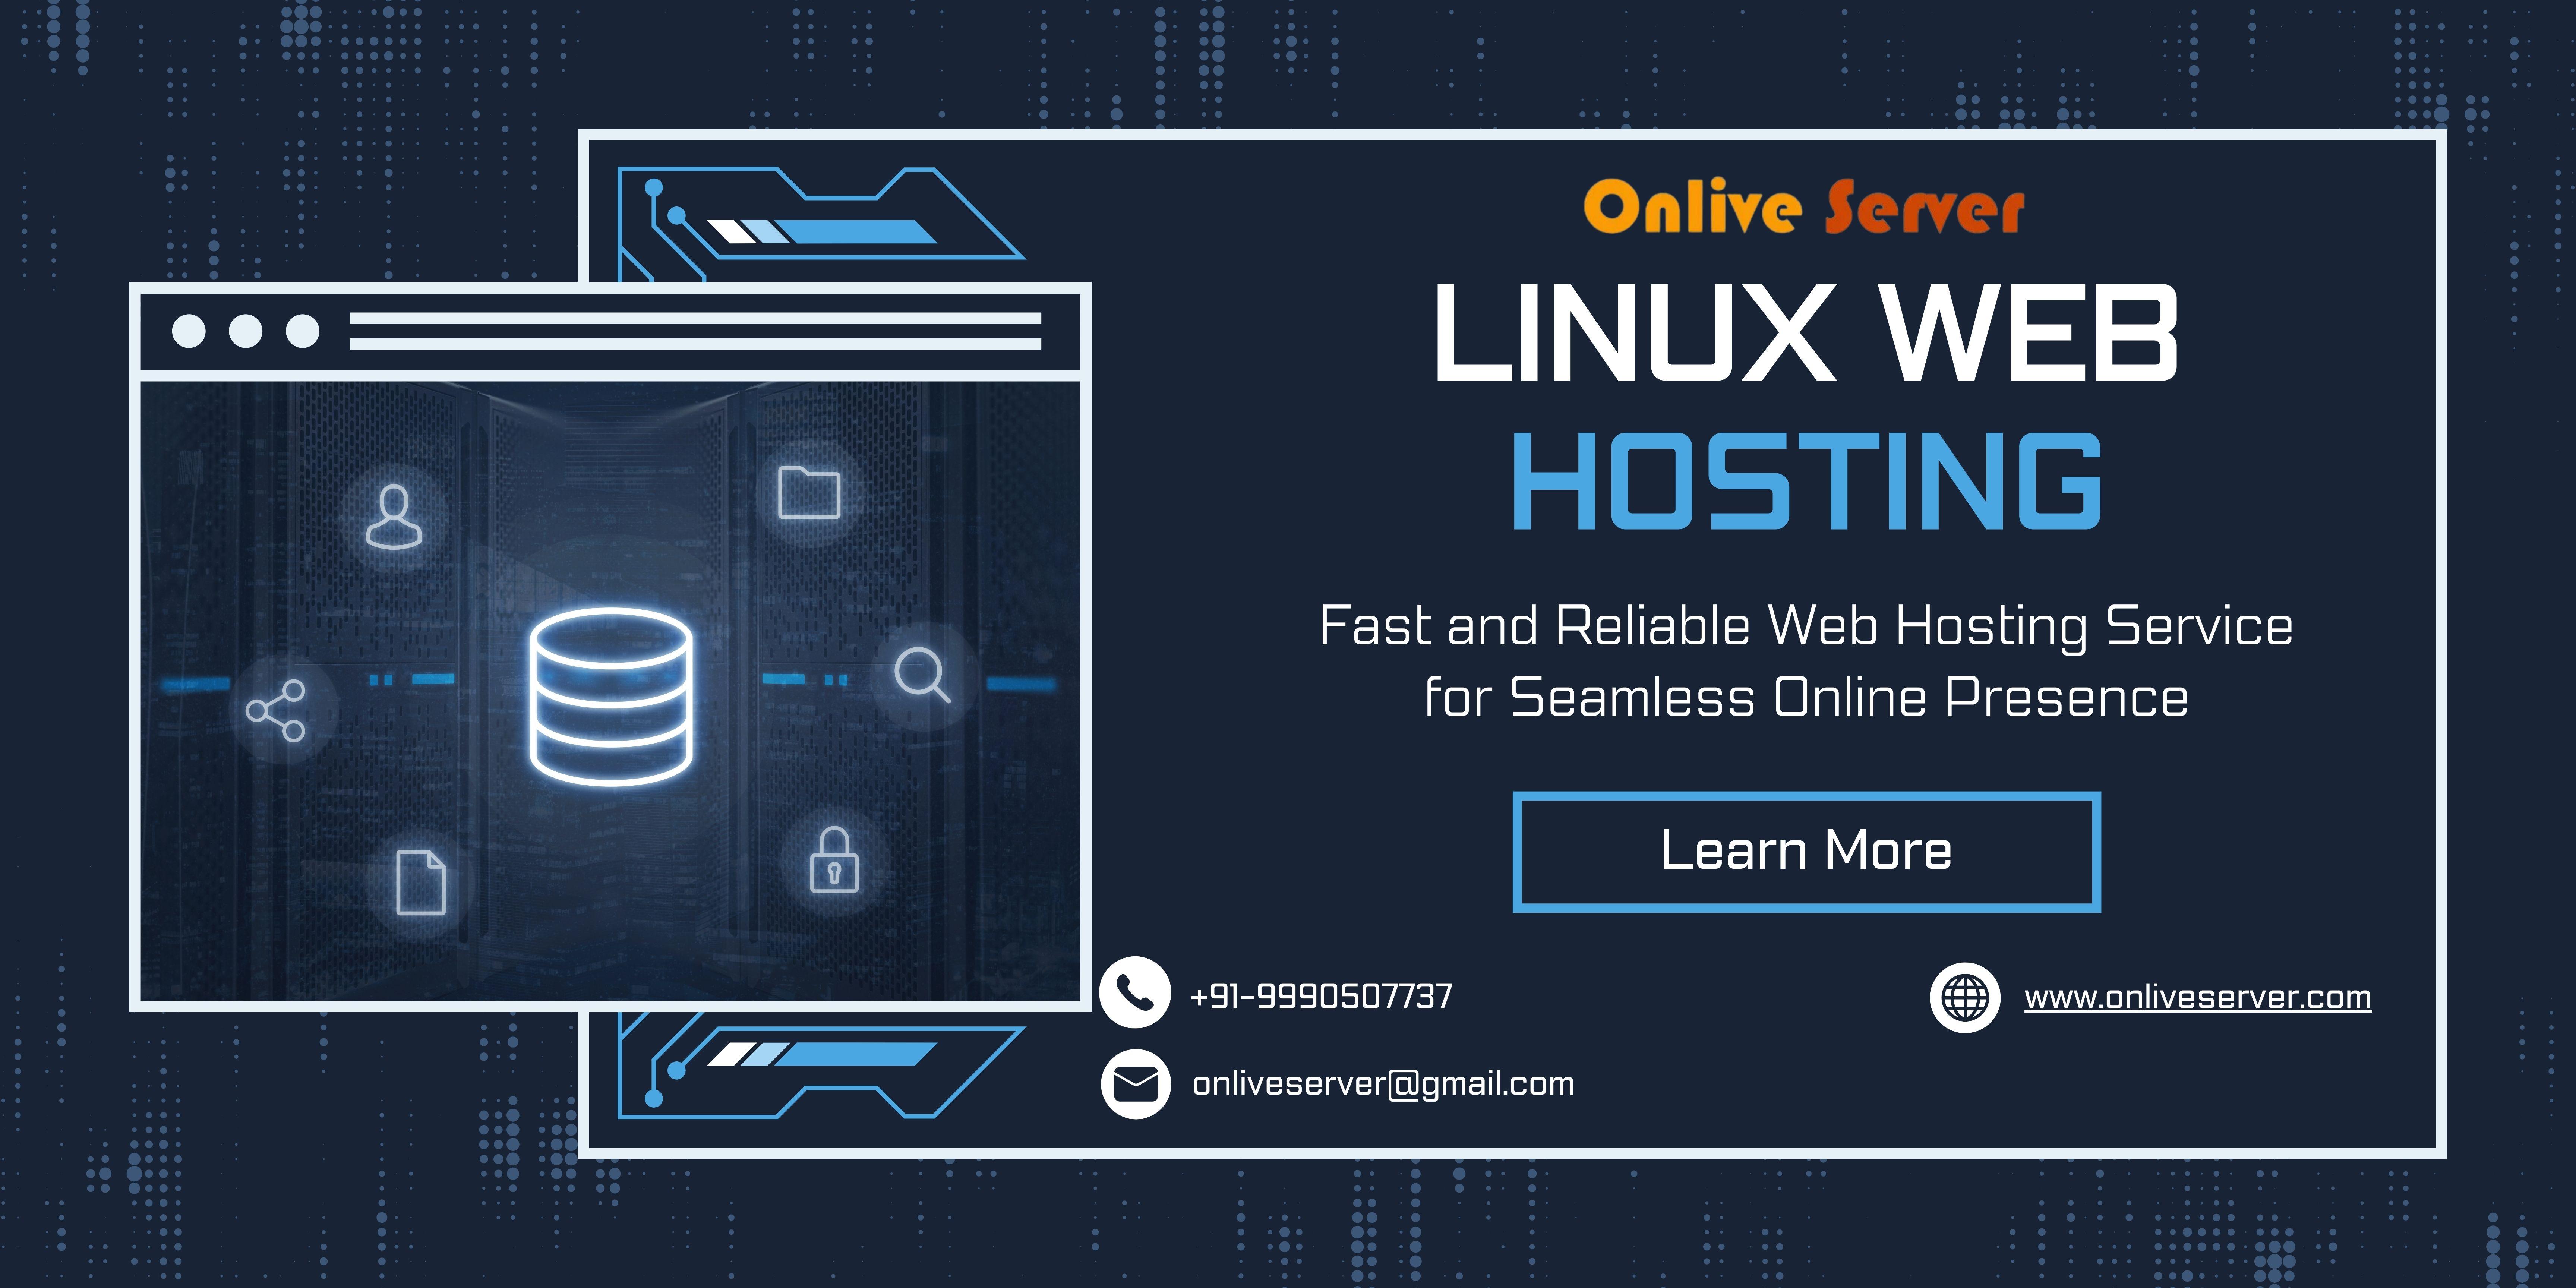 Experience with The Excellent Linux Web Hosting: An All-in-One...